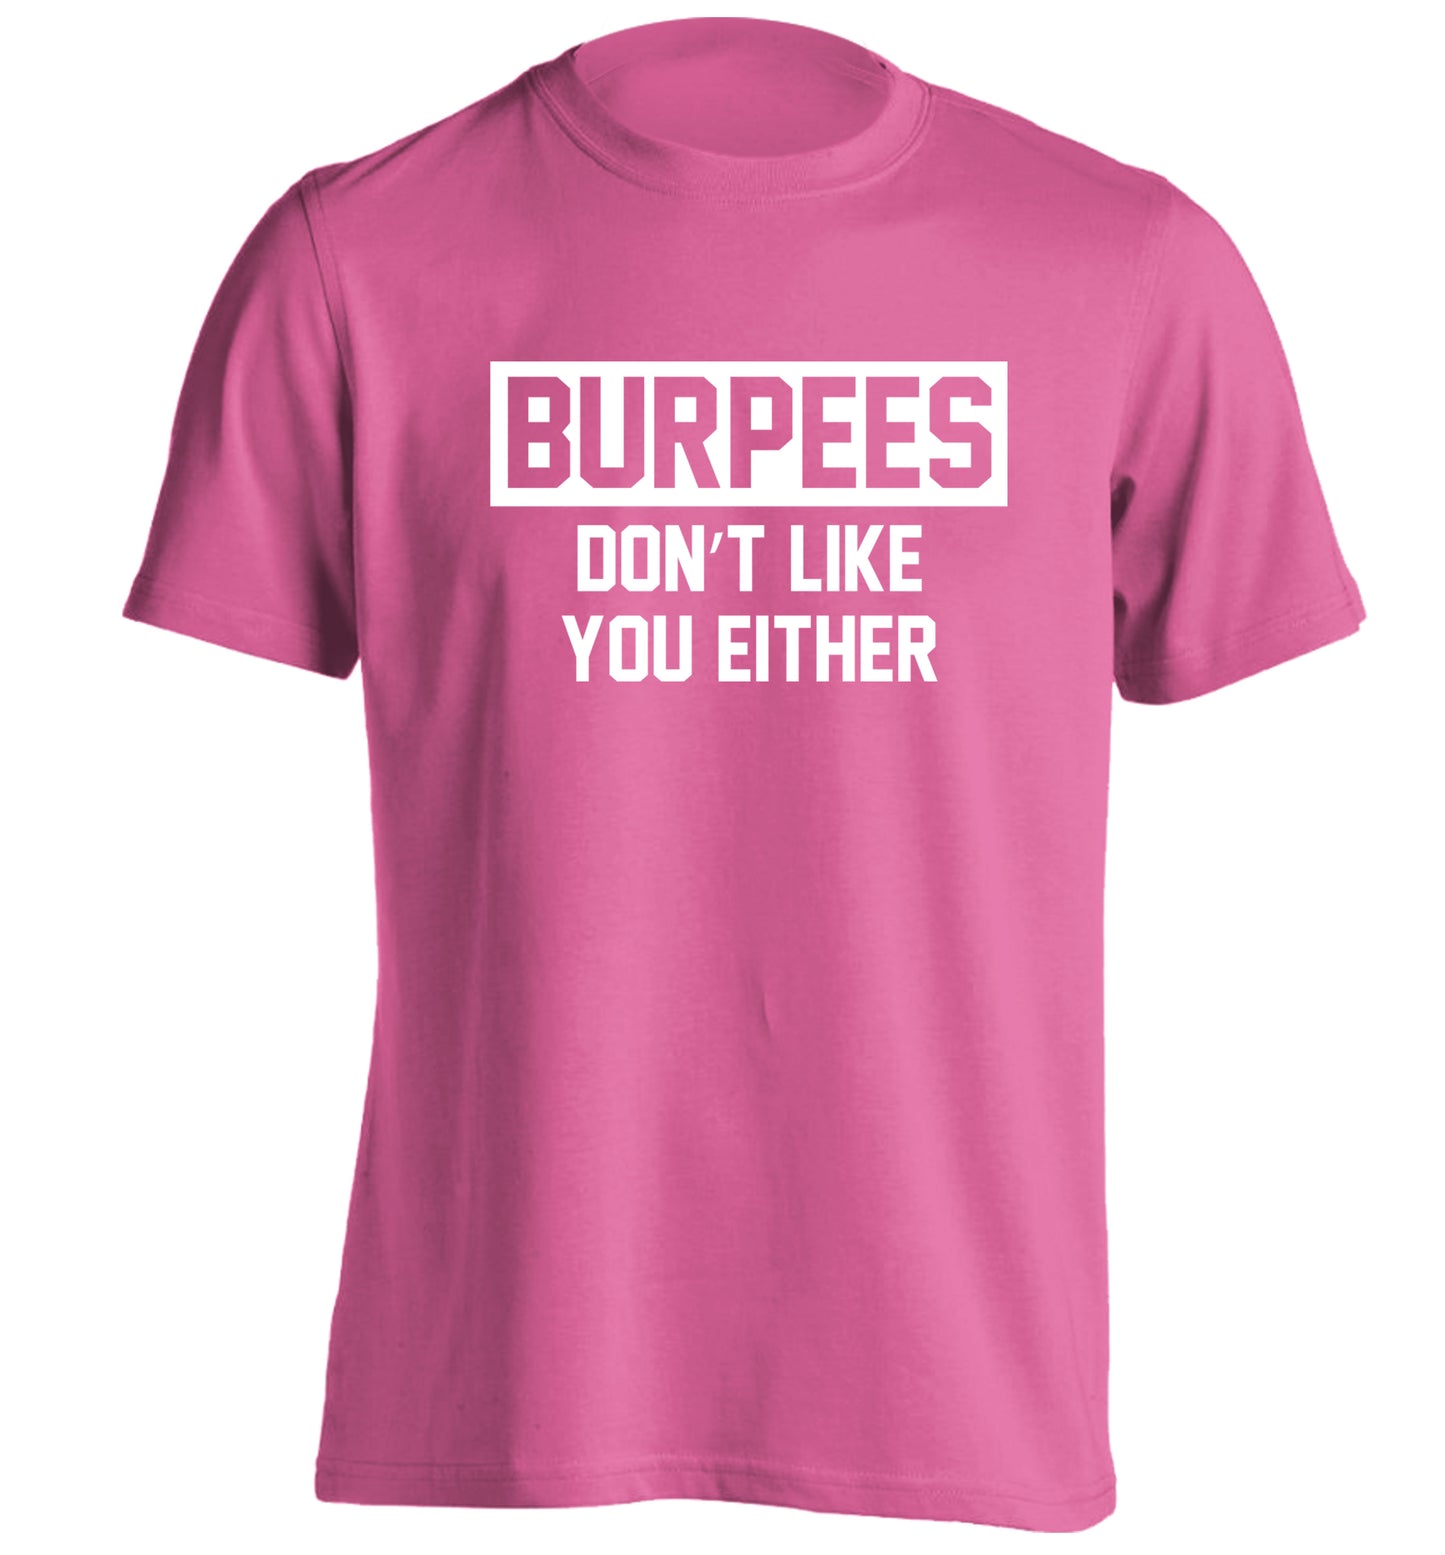 Burpees don't like you either adults unisex pink Tshirt 2XL